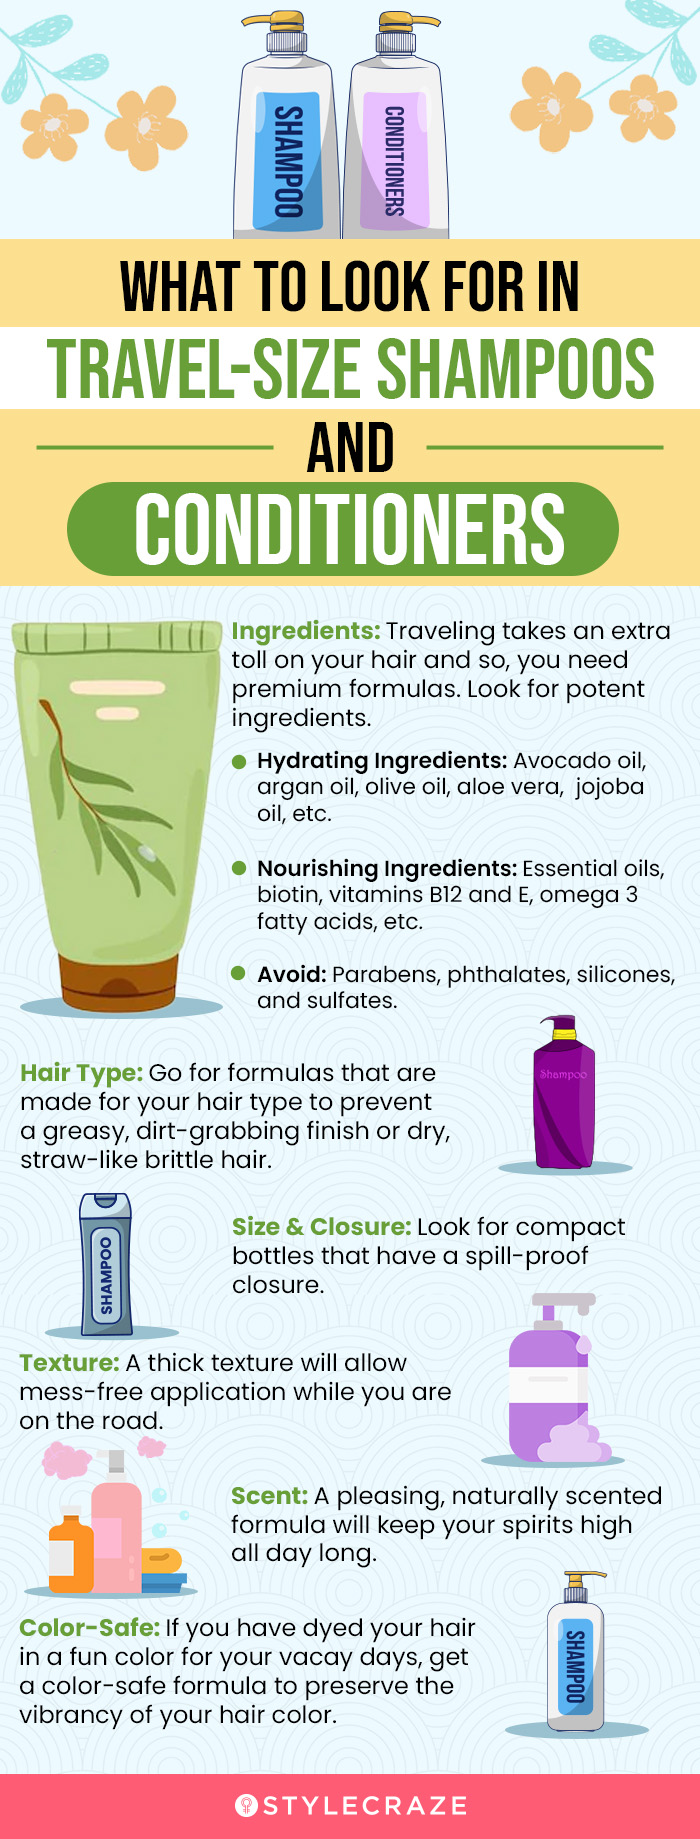 What To Look For In Travel-Size Shampoos And Conditioners (infographic)